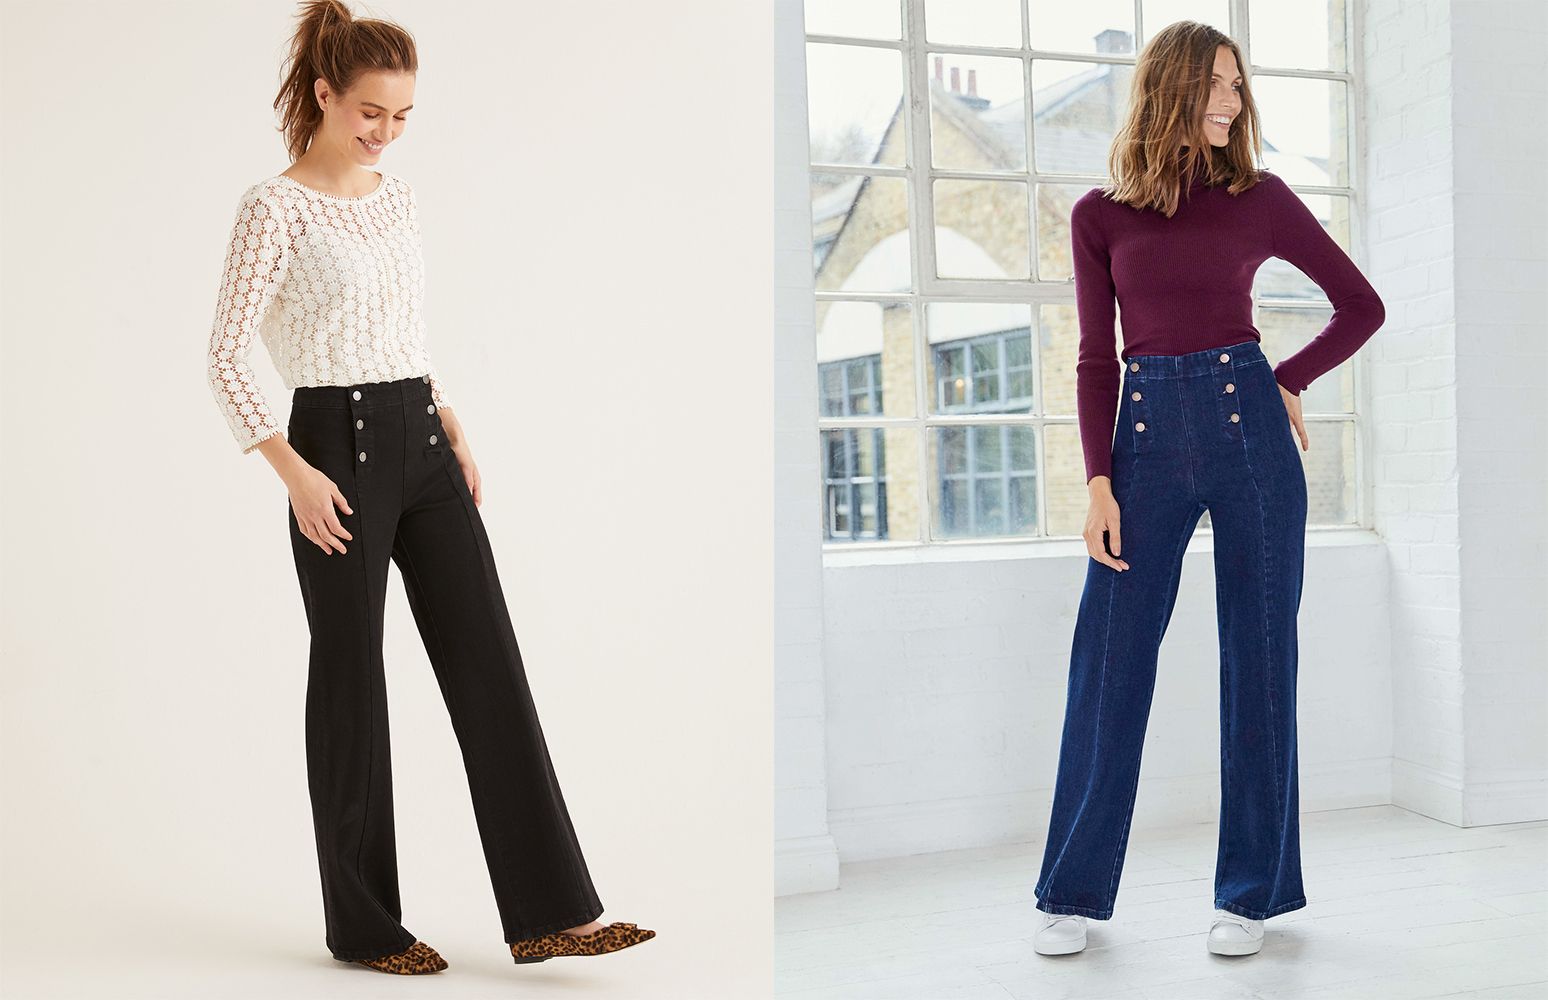 Boden jeans - Boden launches new jeans for every body denim collection